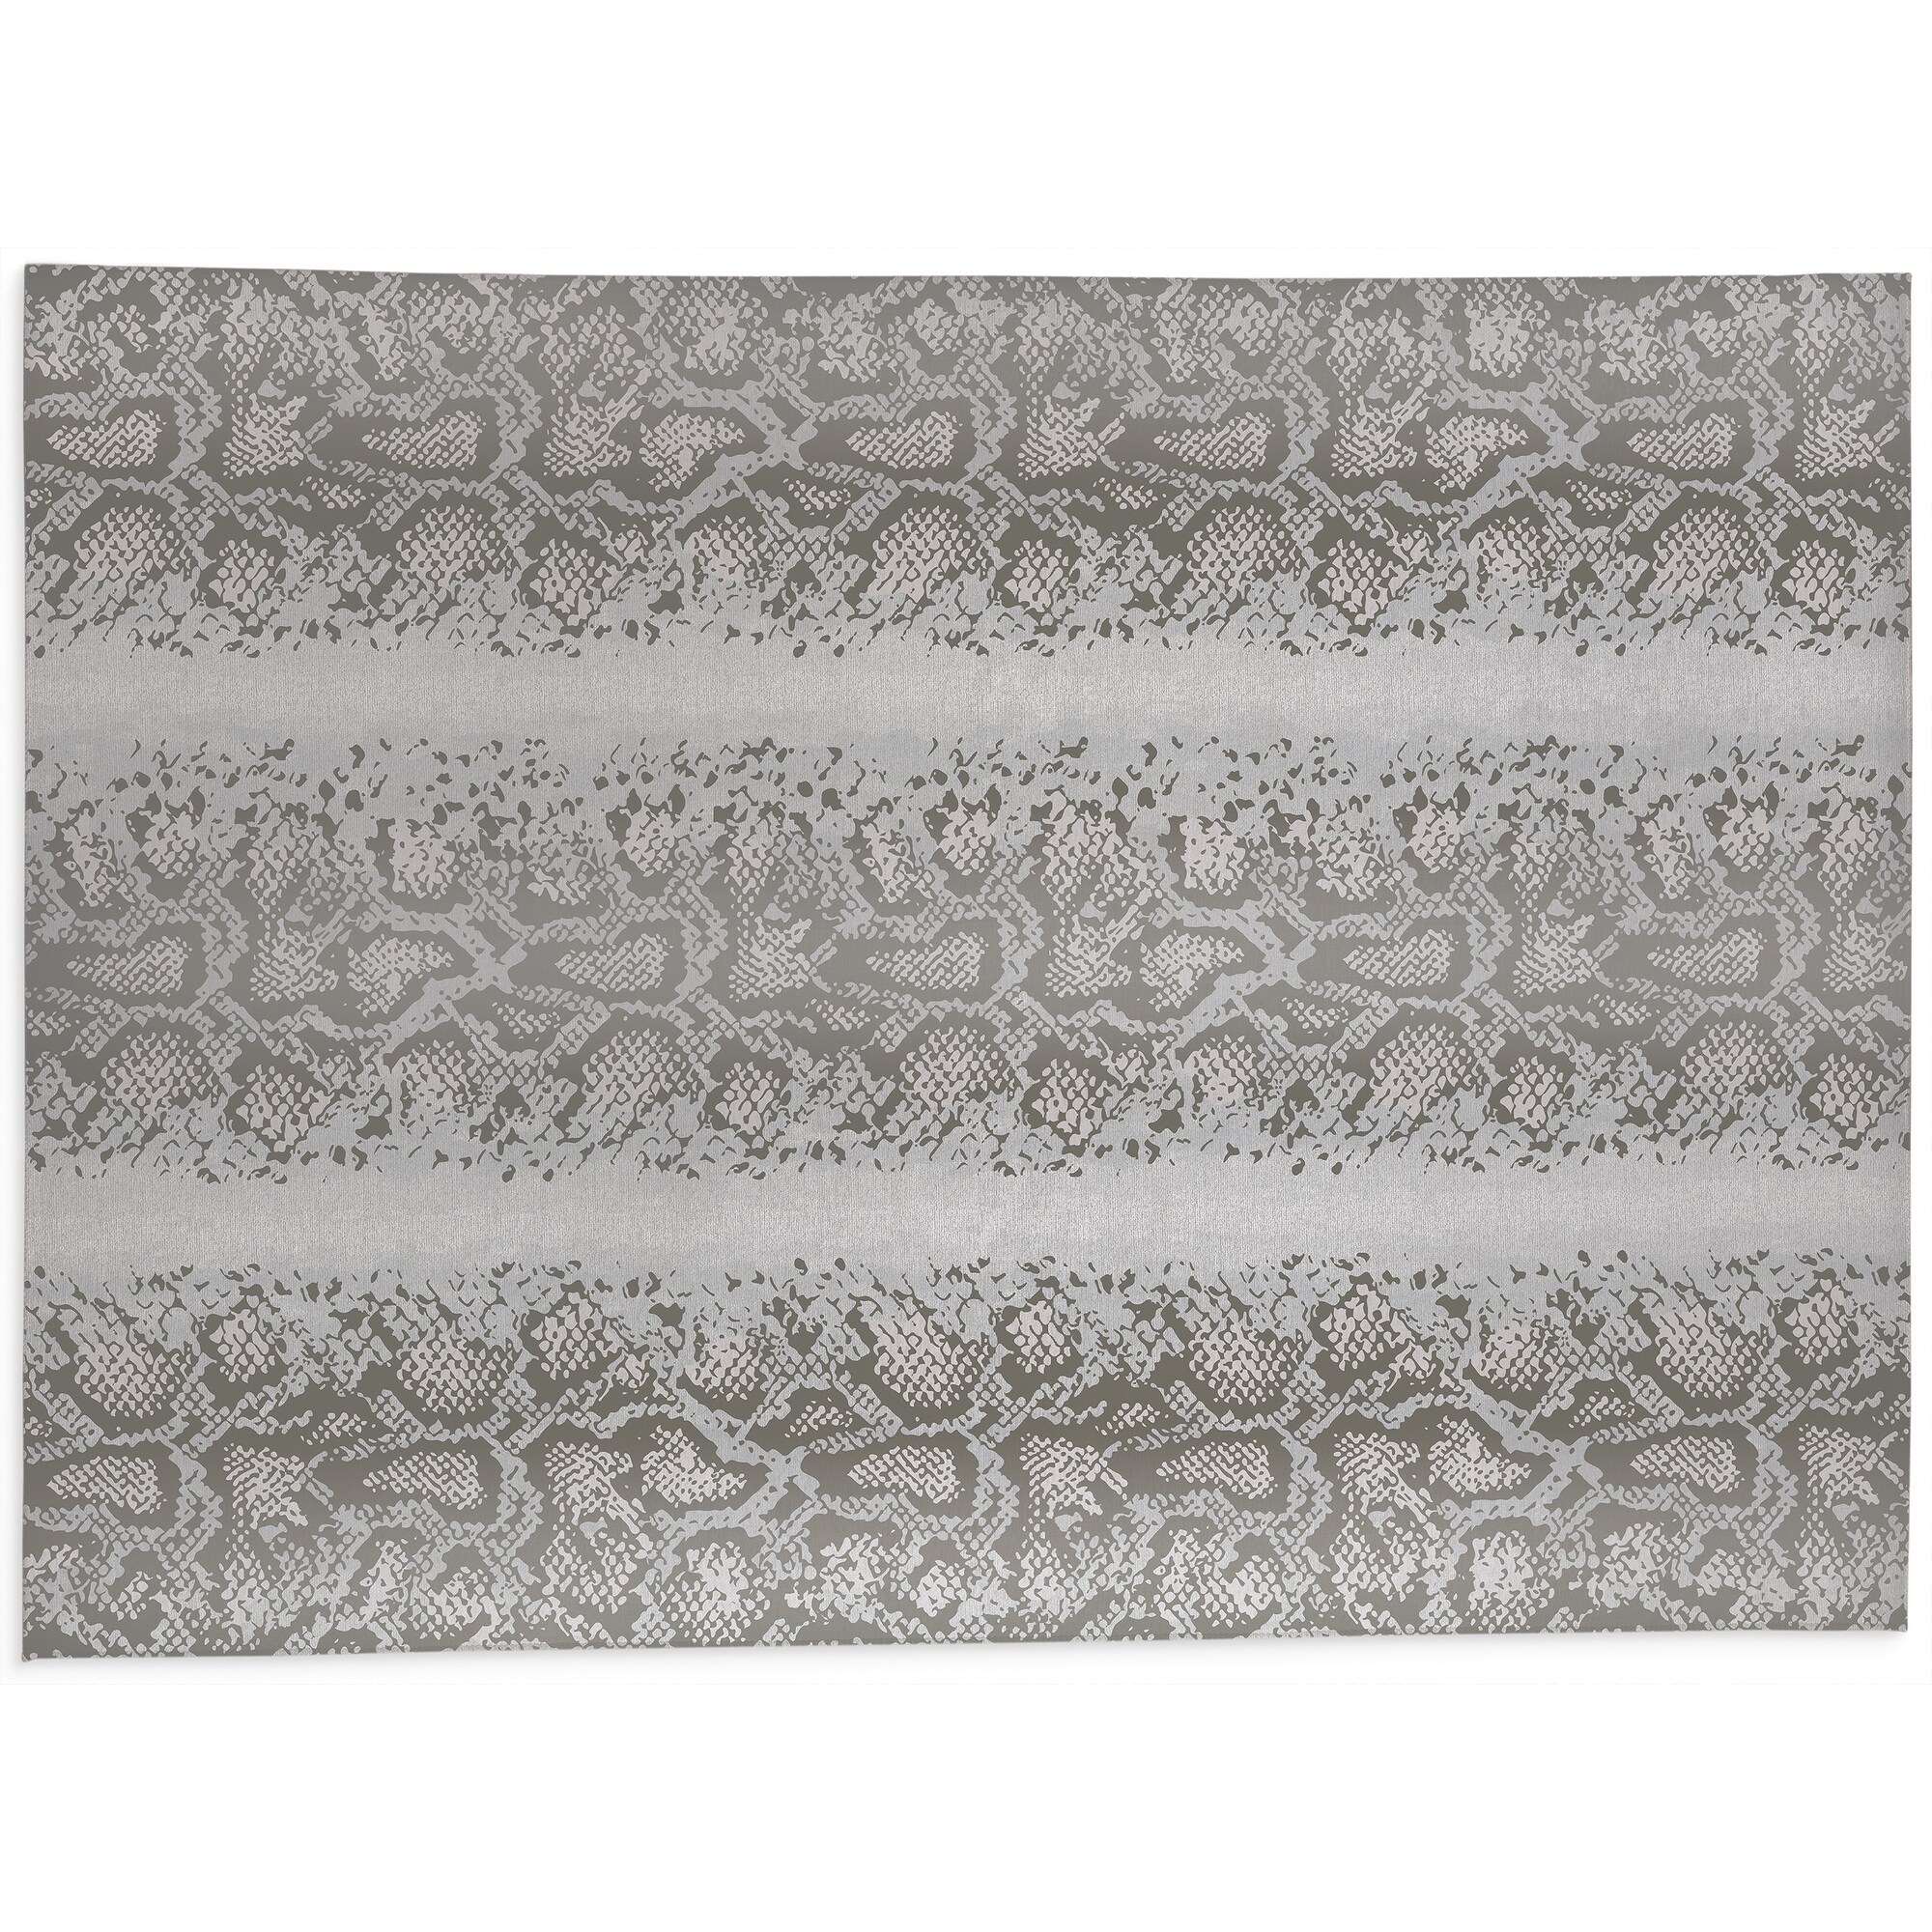 https://ak1.ostkcdn.com/images/products/is/images/direct/573aaf35aed3abf6446a48c3174f45074a09d3d5/SNAKE-GREIGE-Bath-Rug-By-Kavka-Designs.jpg